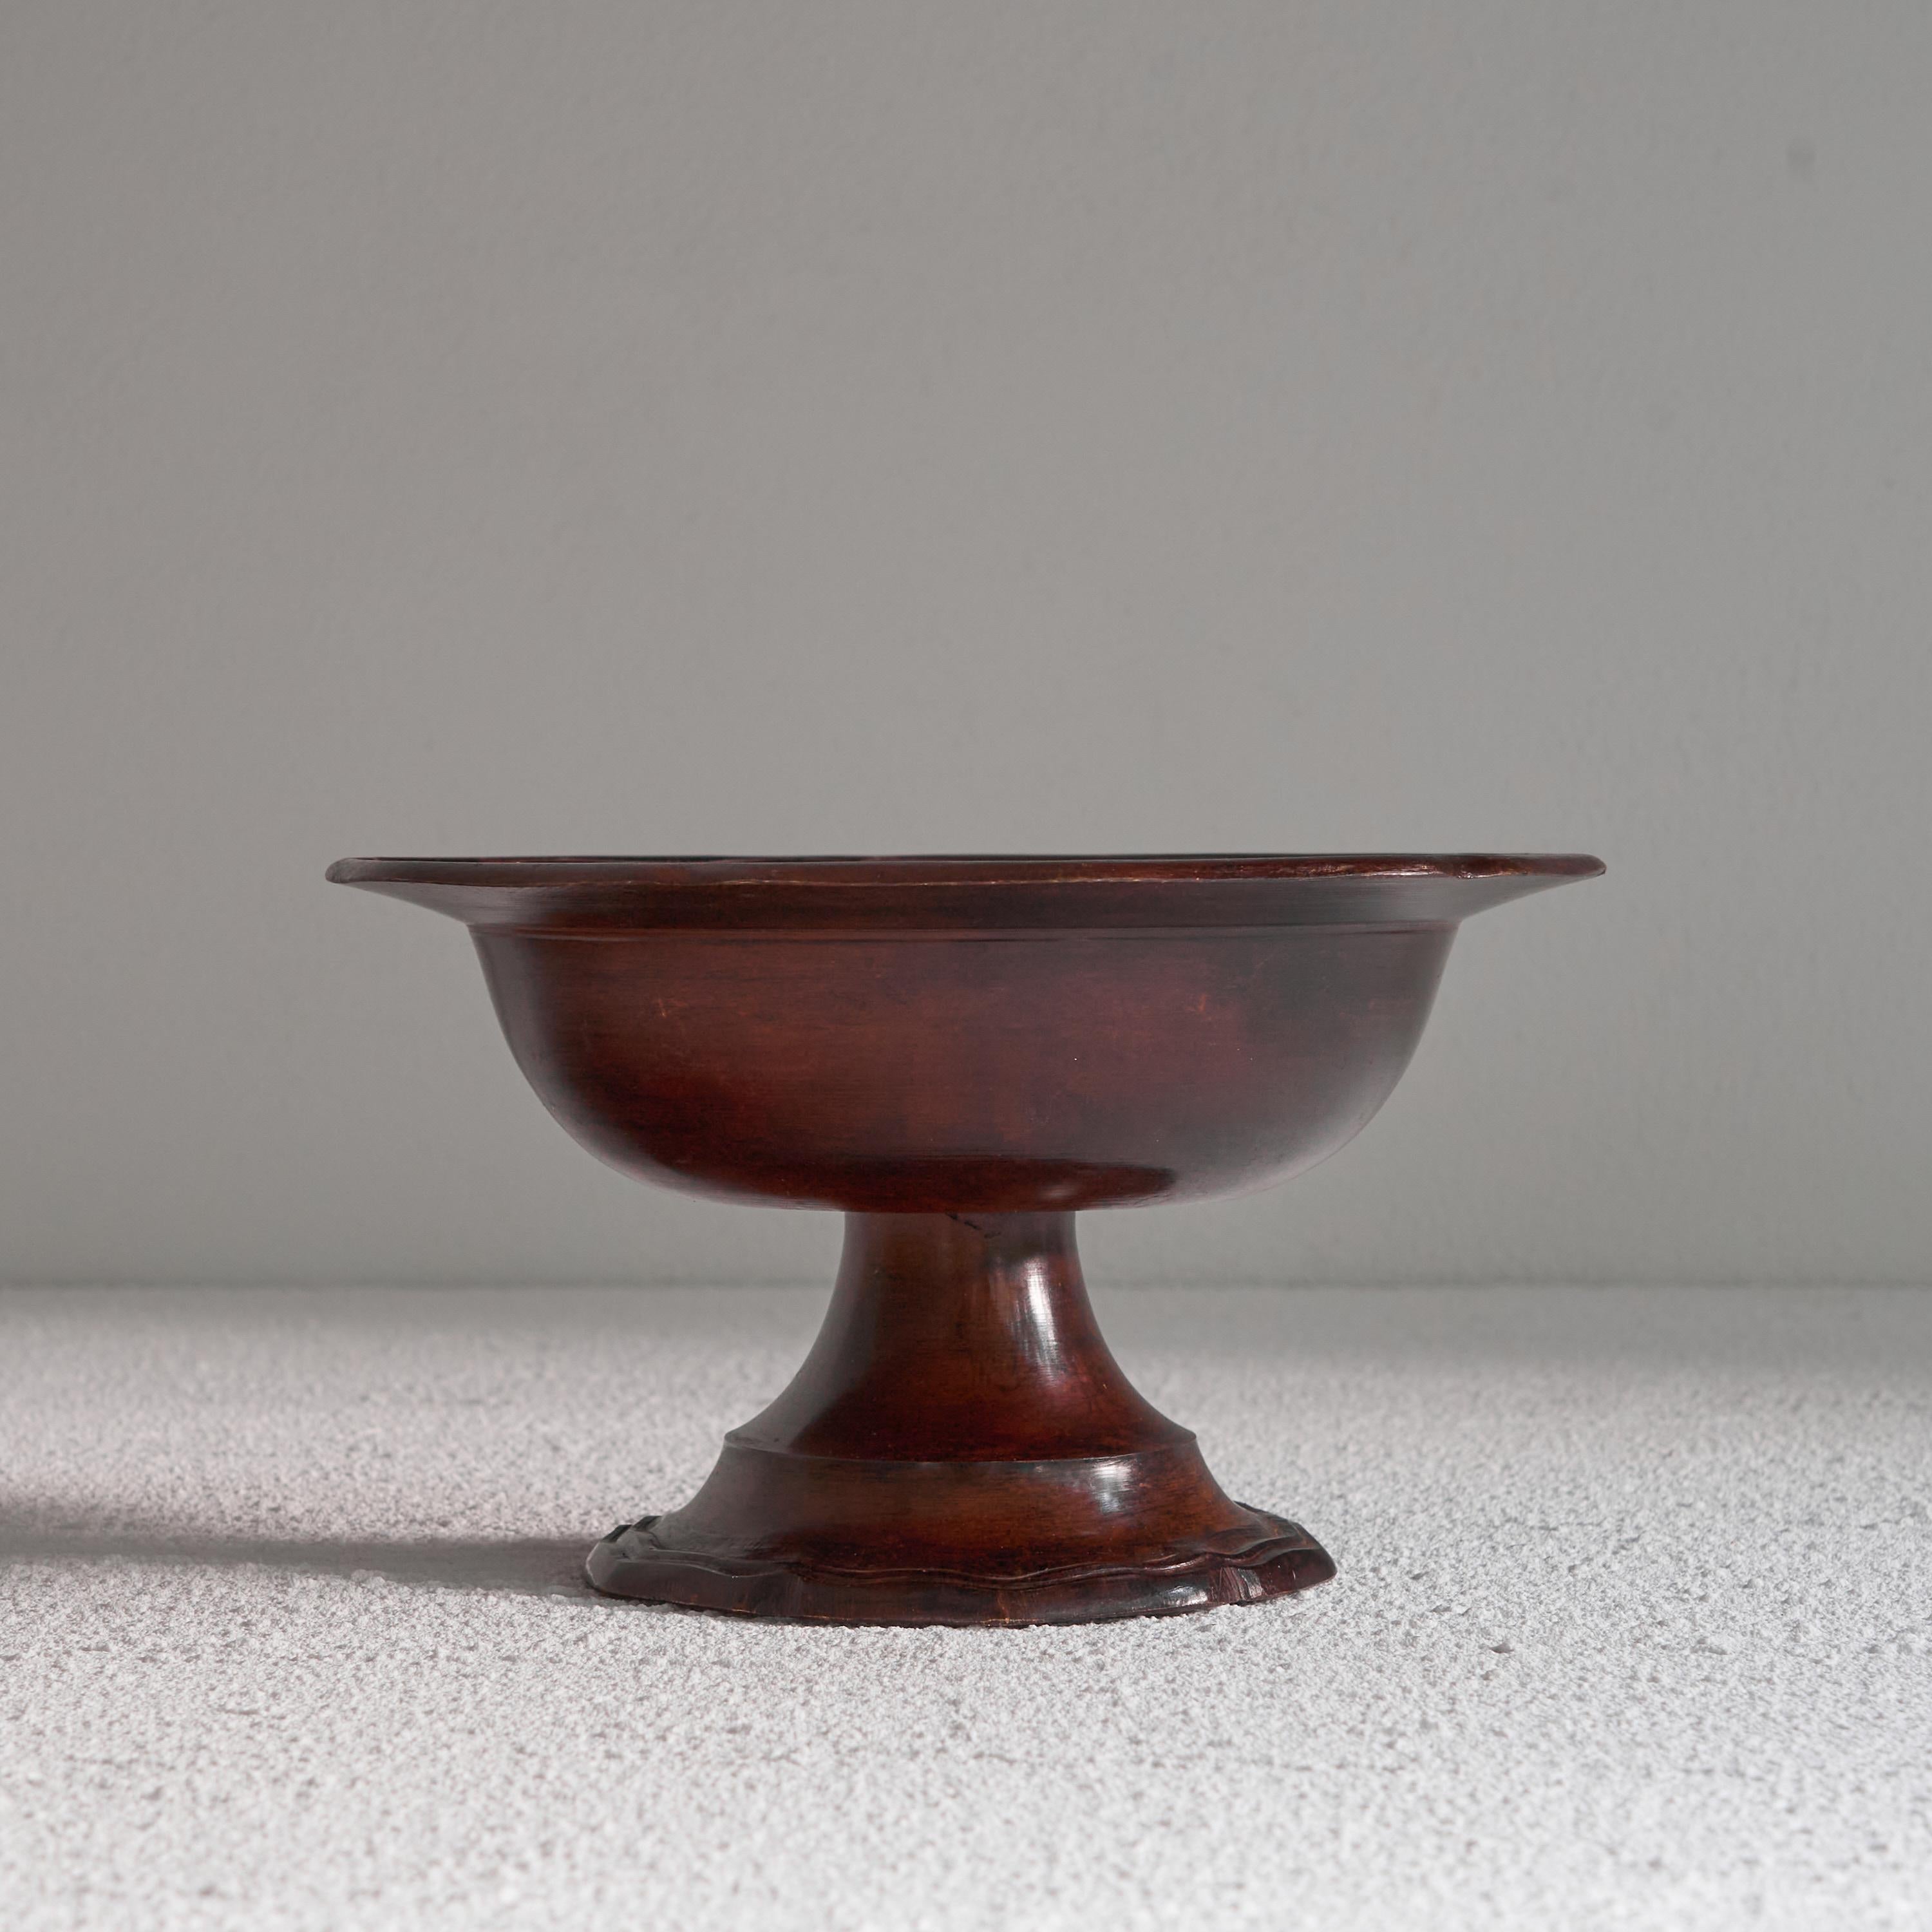 Antique Burgundy Colored Footed Bowl in Bronze, first half of the 20th century. 

Beautiful and well made footed bowl in bronze. Great deep burgundy color, shifting from red to brown and gold. Heavy and solid, made by a skillful artist. This bowl